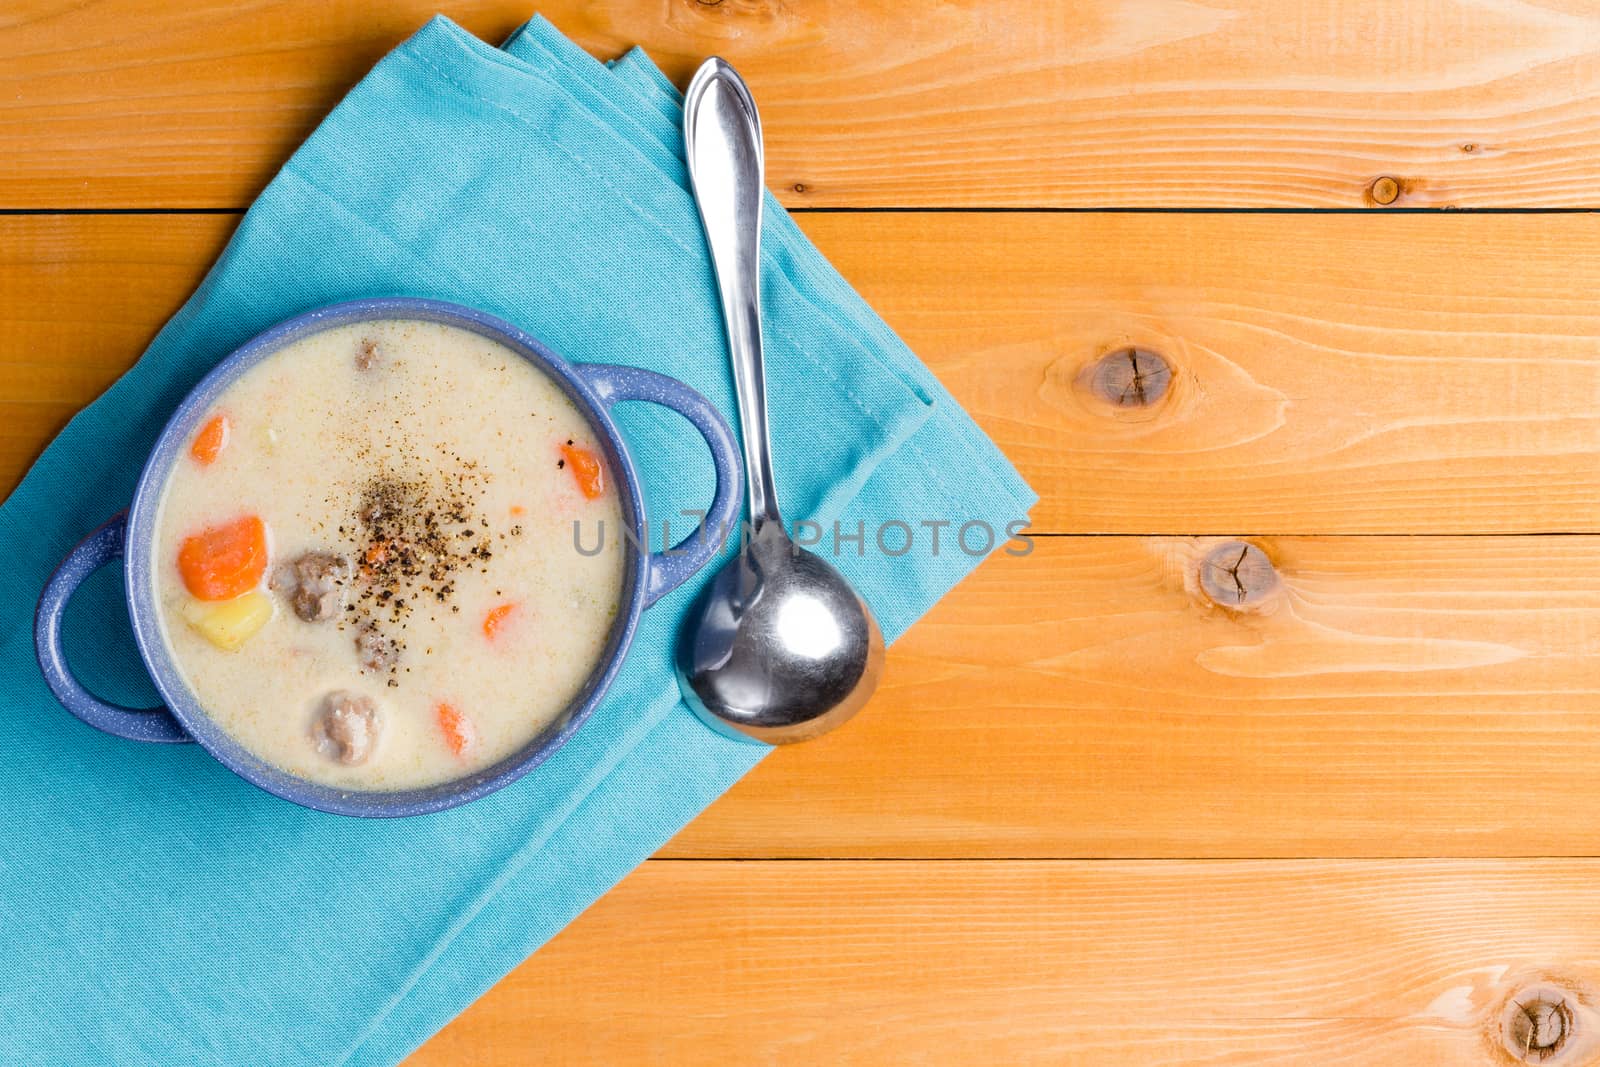 Tasty starter of homemade meatball soup with fresh vegetables seasoned with spicy ground black pepper and served on a blue napkin on a wood table with copy space, overhead view